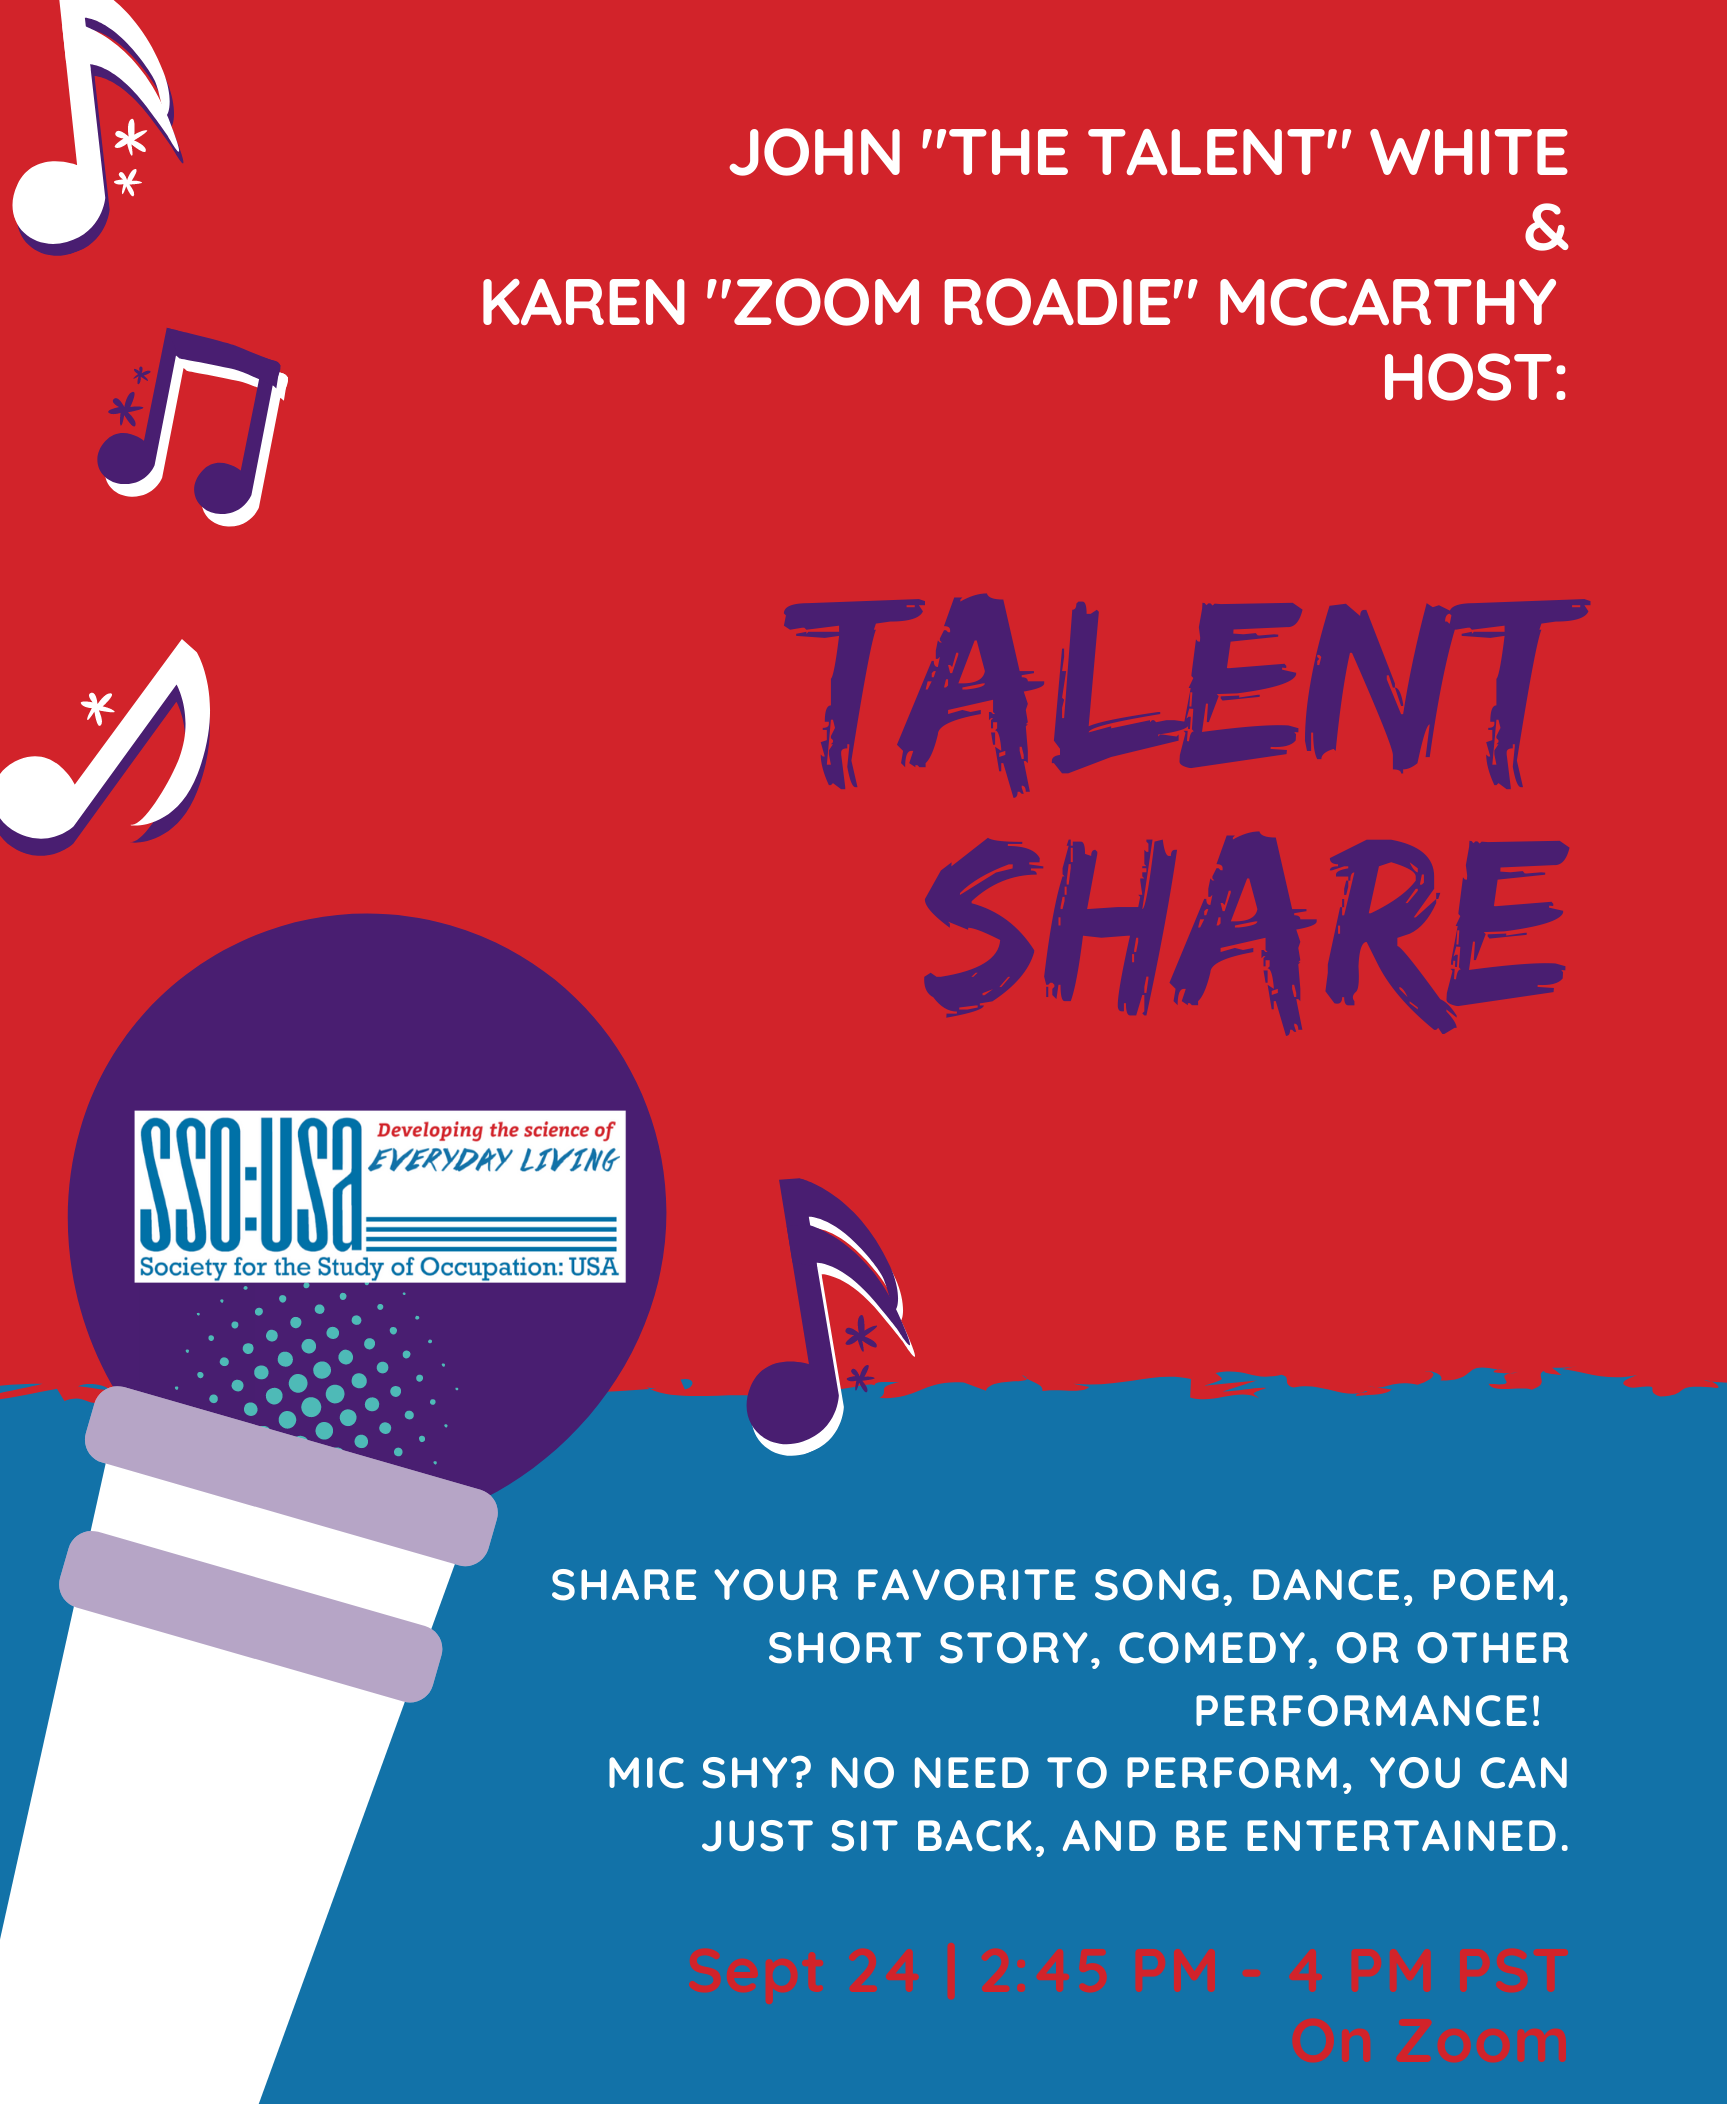 John "the talent" White & Karen "Zoom Roadie" McCarthy Host: "Talent Share" Share your favorite song, dance, poem, short story, comedy, or other performance! Mic shy? no need to perform, you can just sit back, and be entertained. Sept. 24, 2:45pm -4pm PST On Zoom